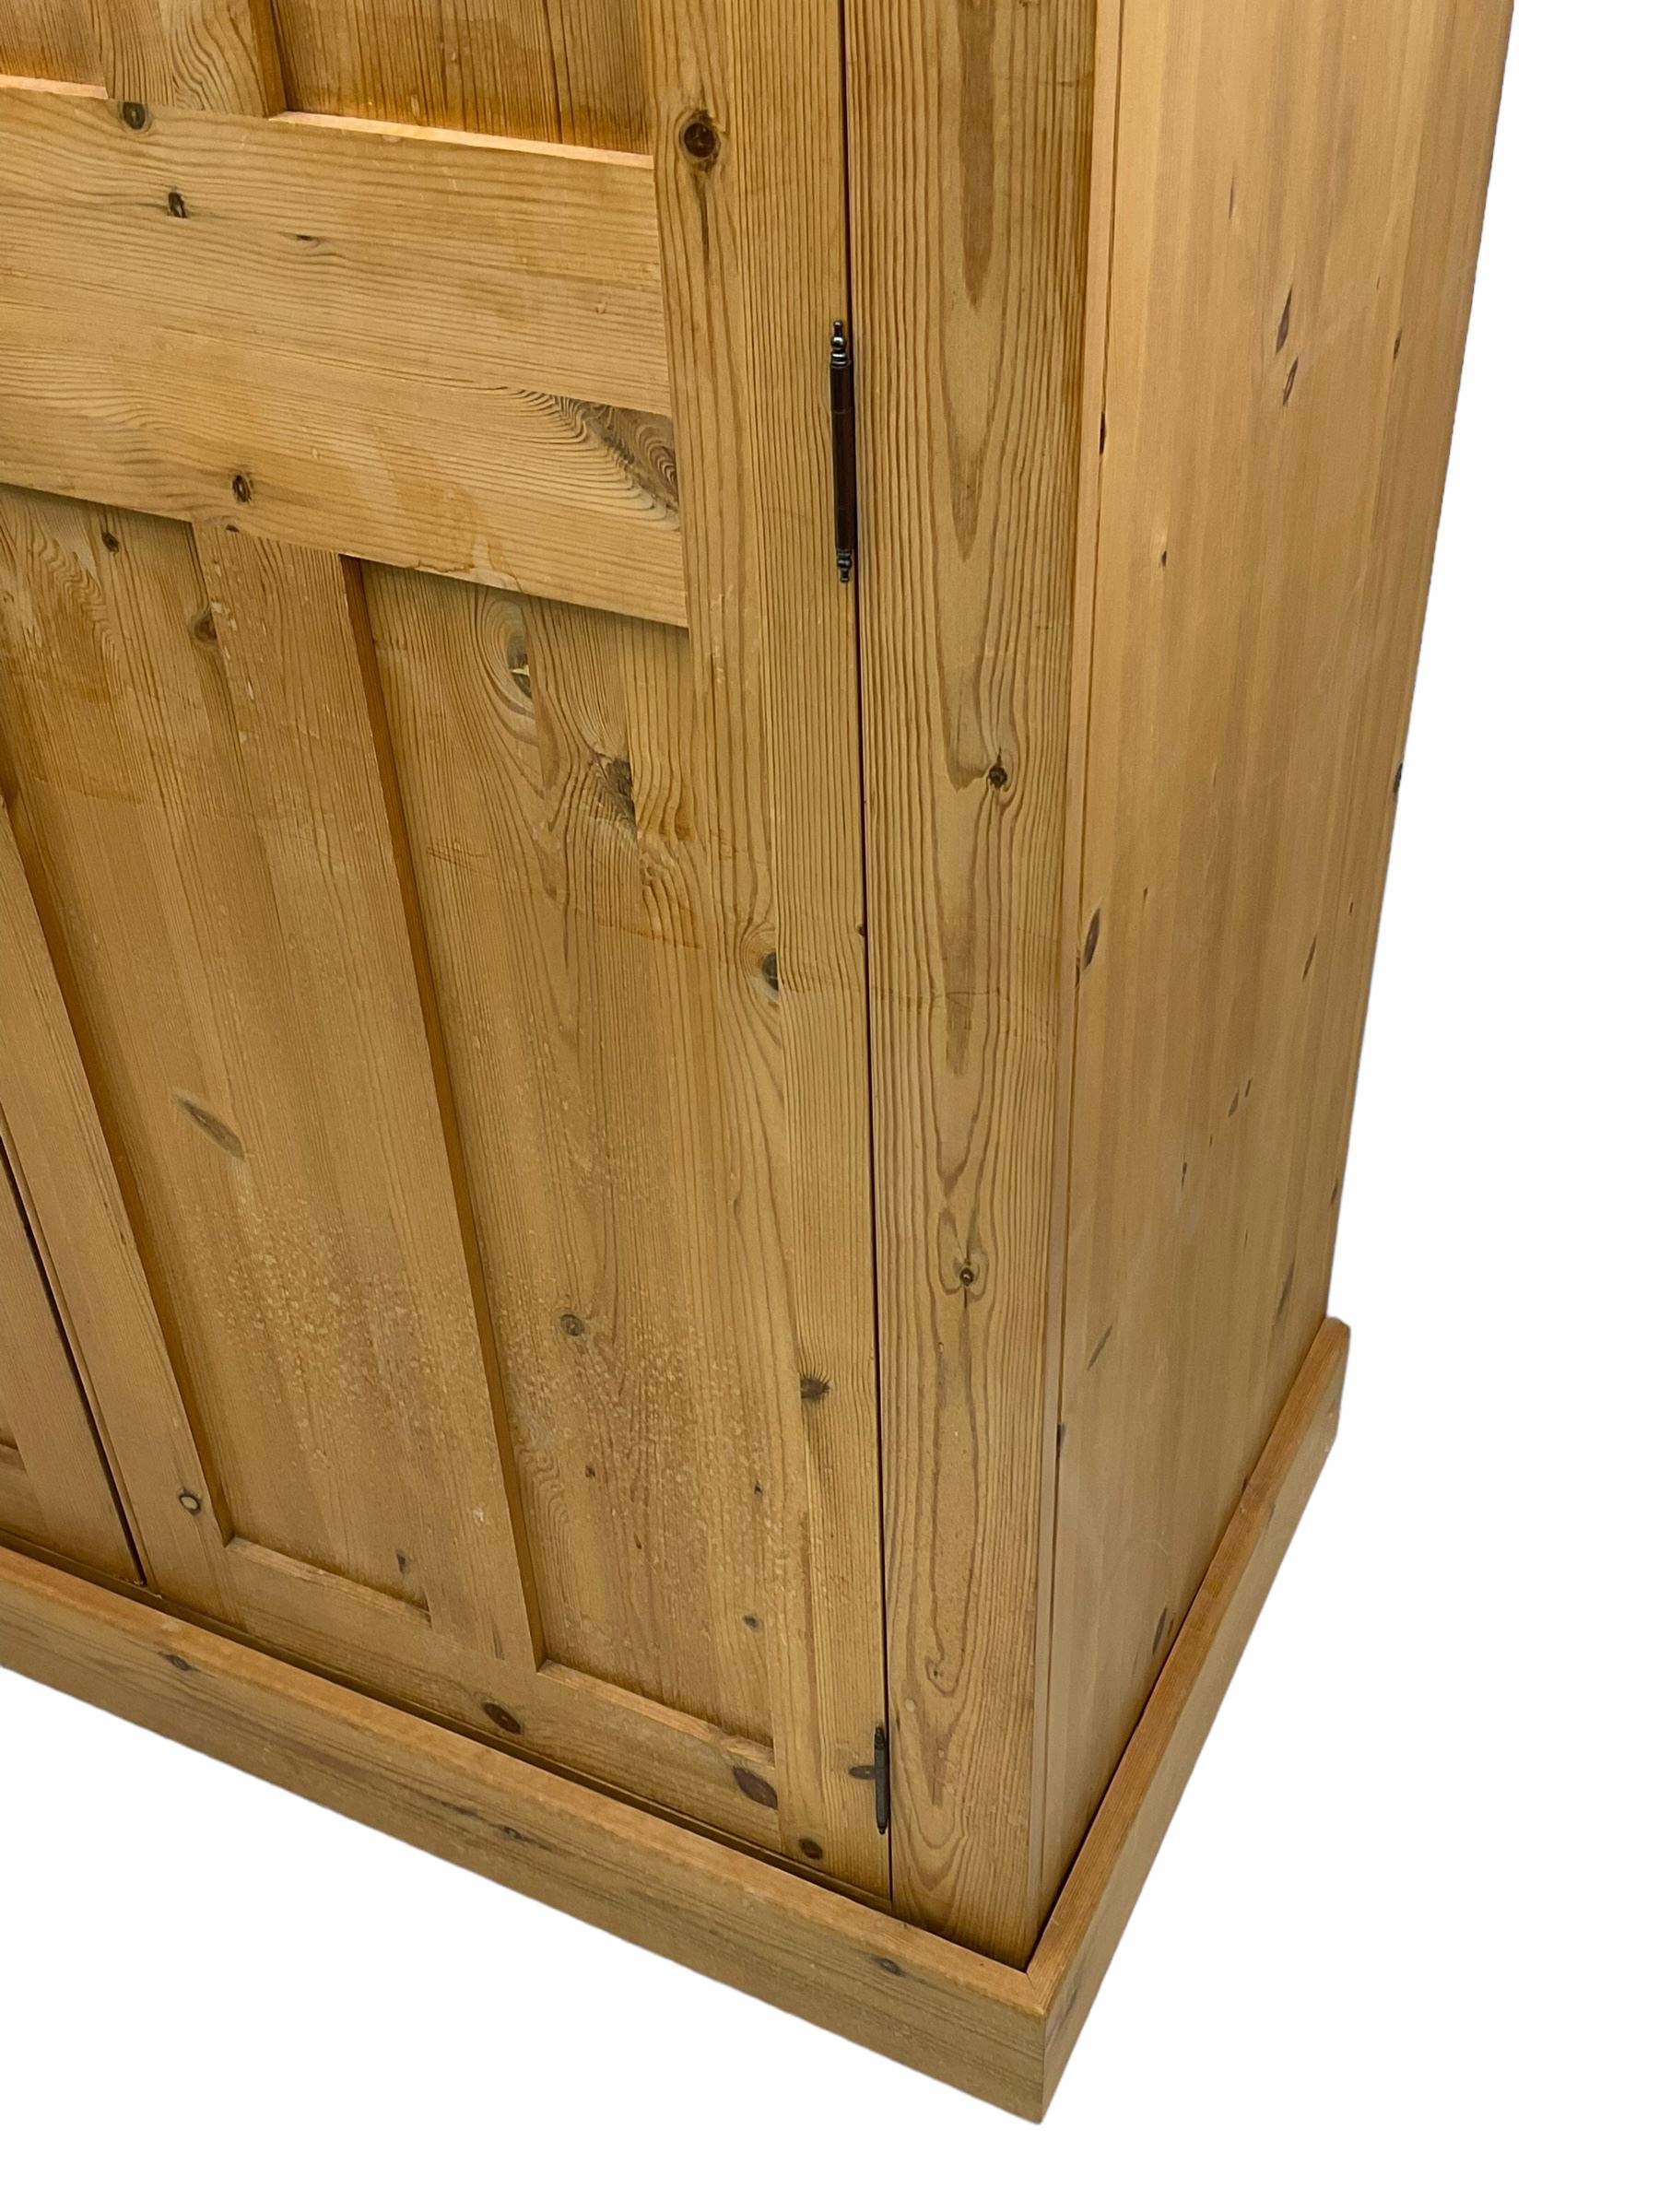 Traditional pine double wardrobe - Image 3 of 4